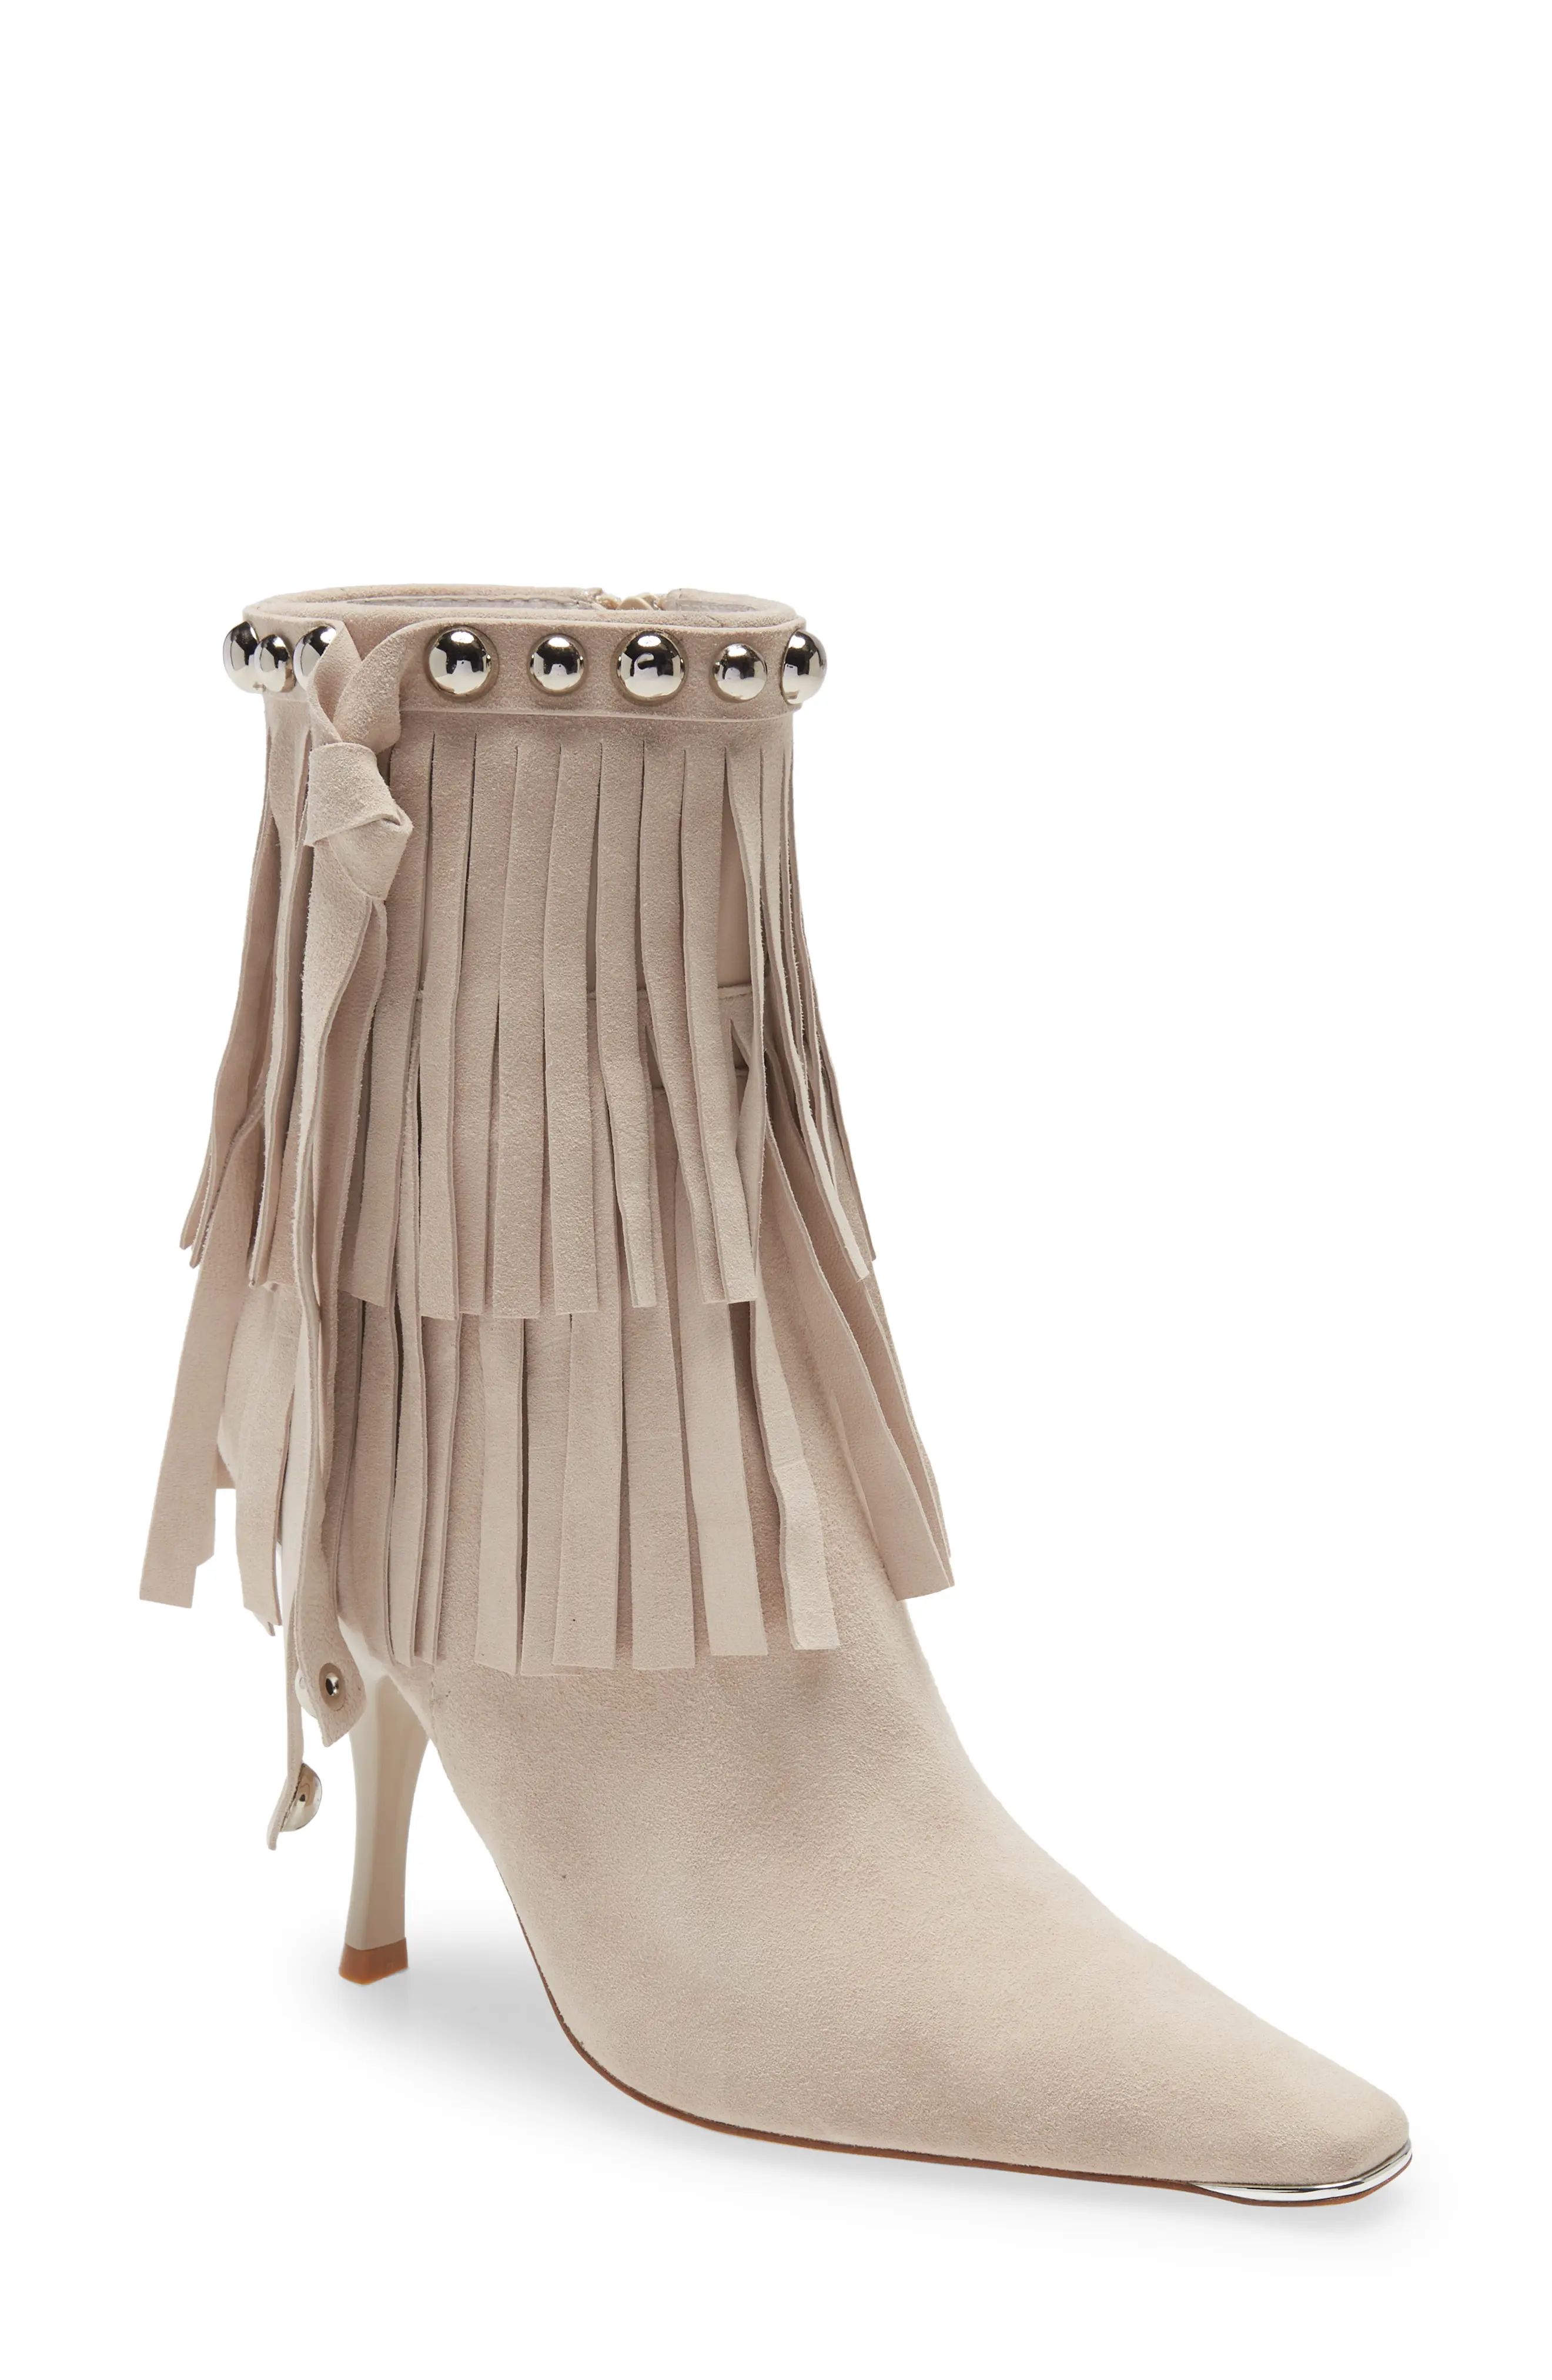 Jeffrey Campbell Trotting Bootie, Size 9.5 in Ice Suede at Nordstrom | Nordstrom